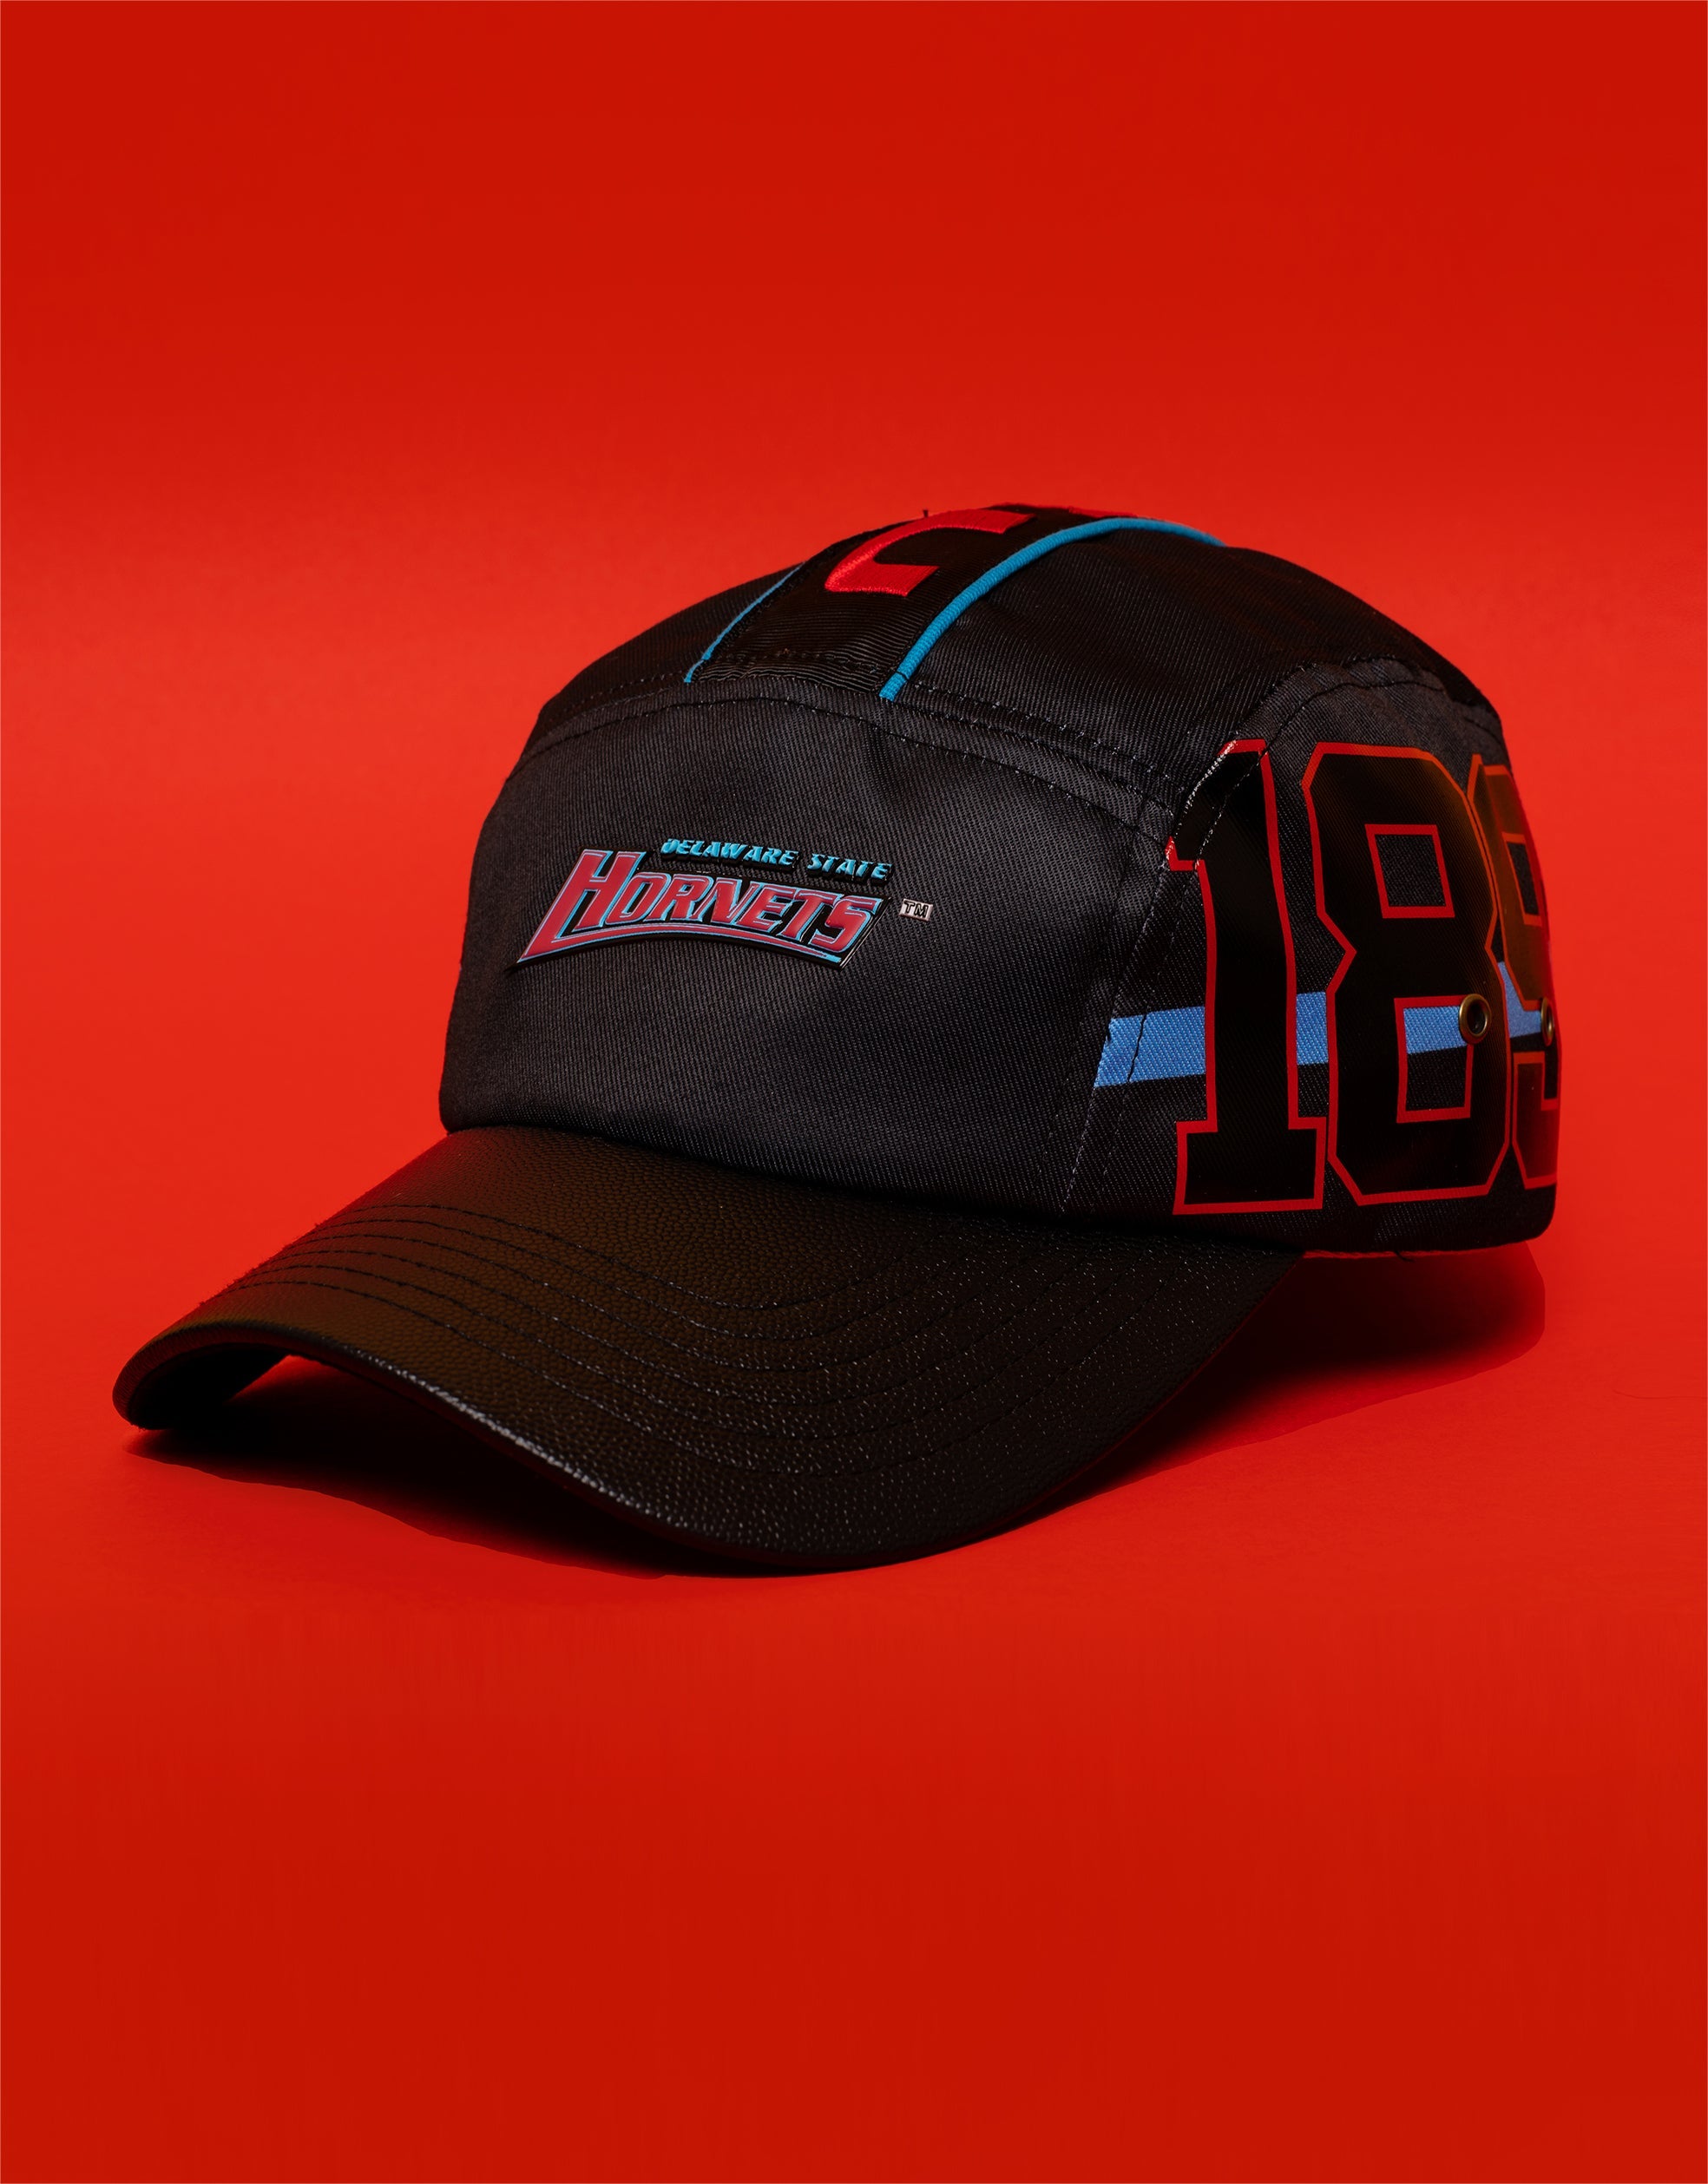 TheYard - BLACKOUT - Delaware State University - HBCU Hat